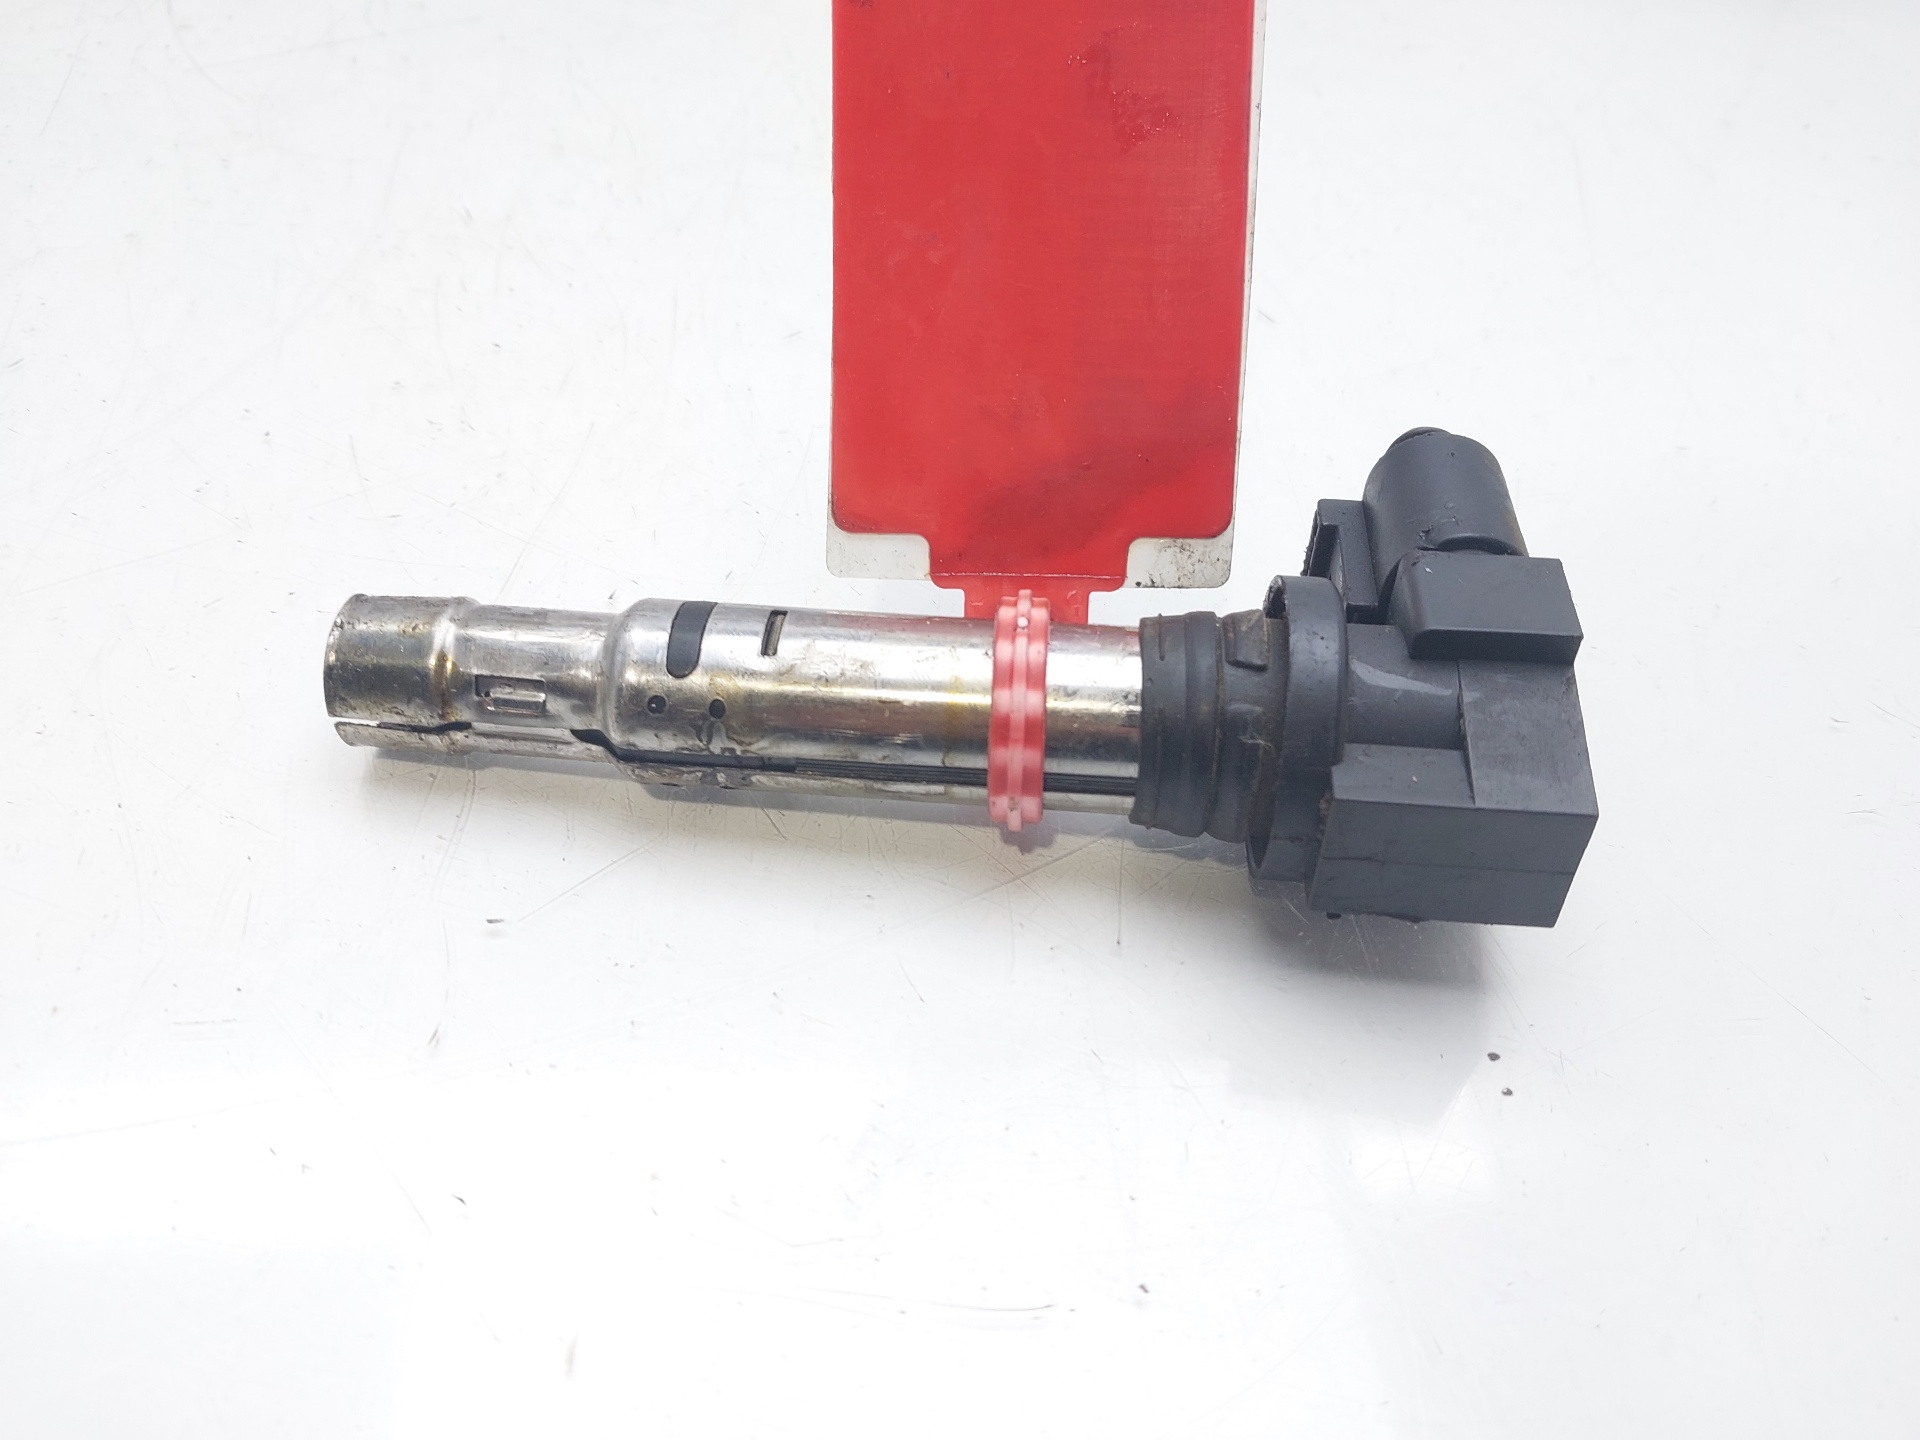 SEAT Toledo 2 generation (1999-2006) High Voltage Ignition Coil 036905715E 25178489